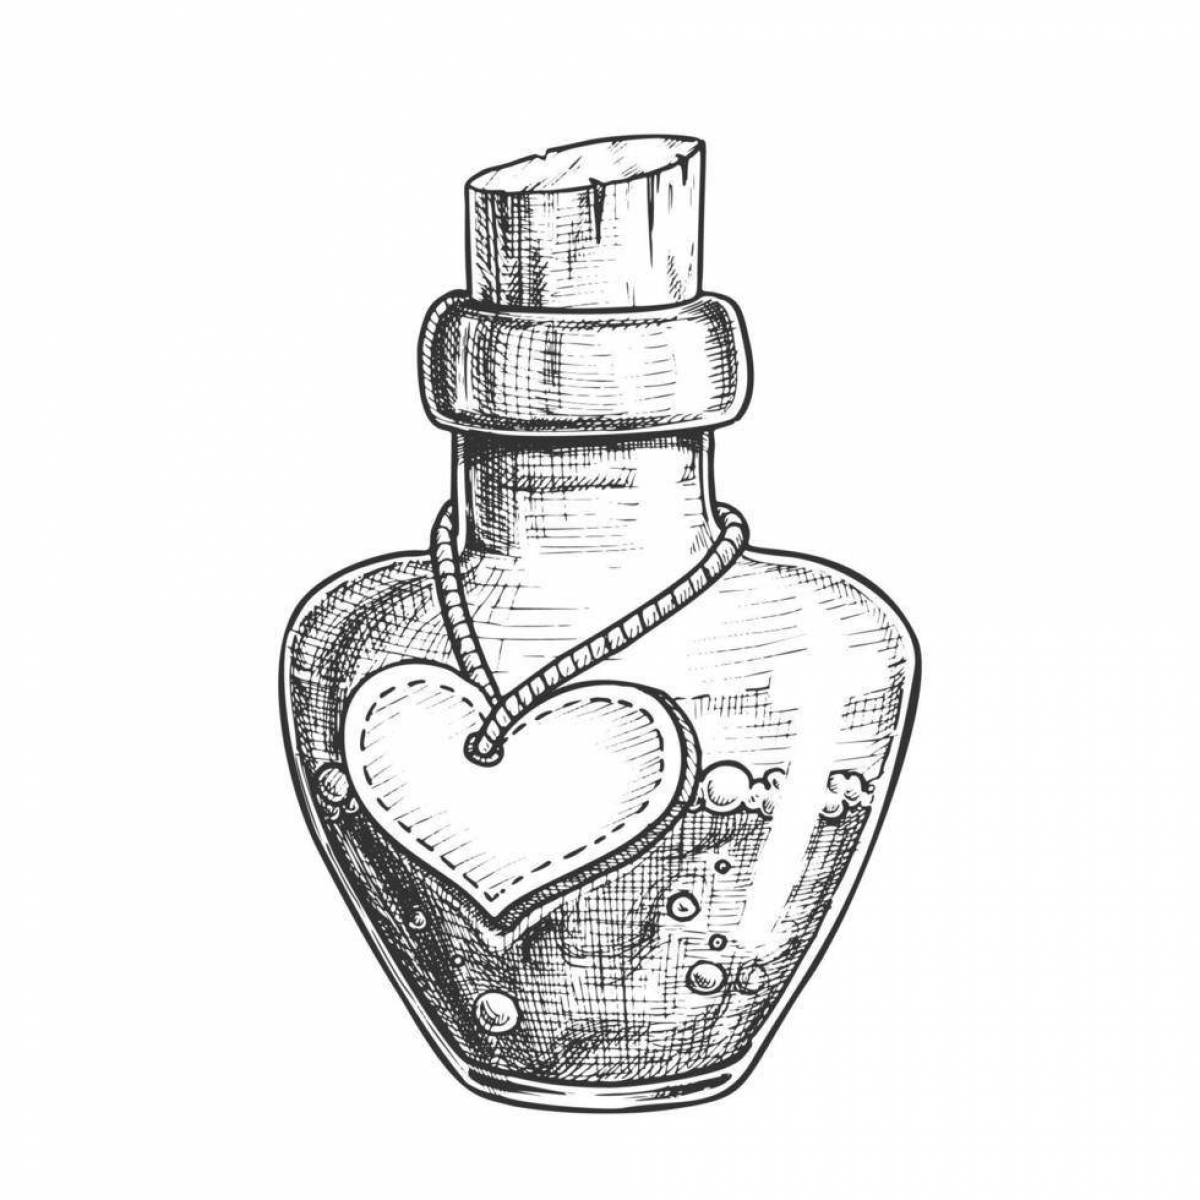 Mystical coloring potion in a bottle